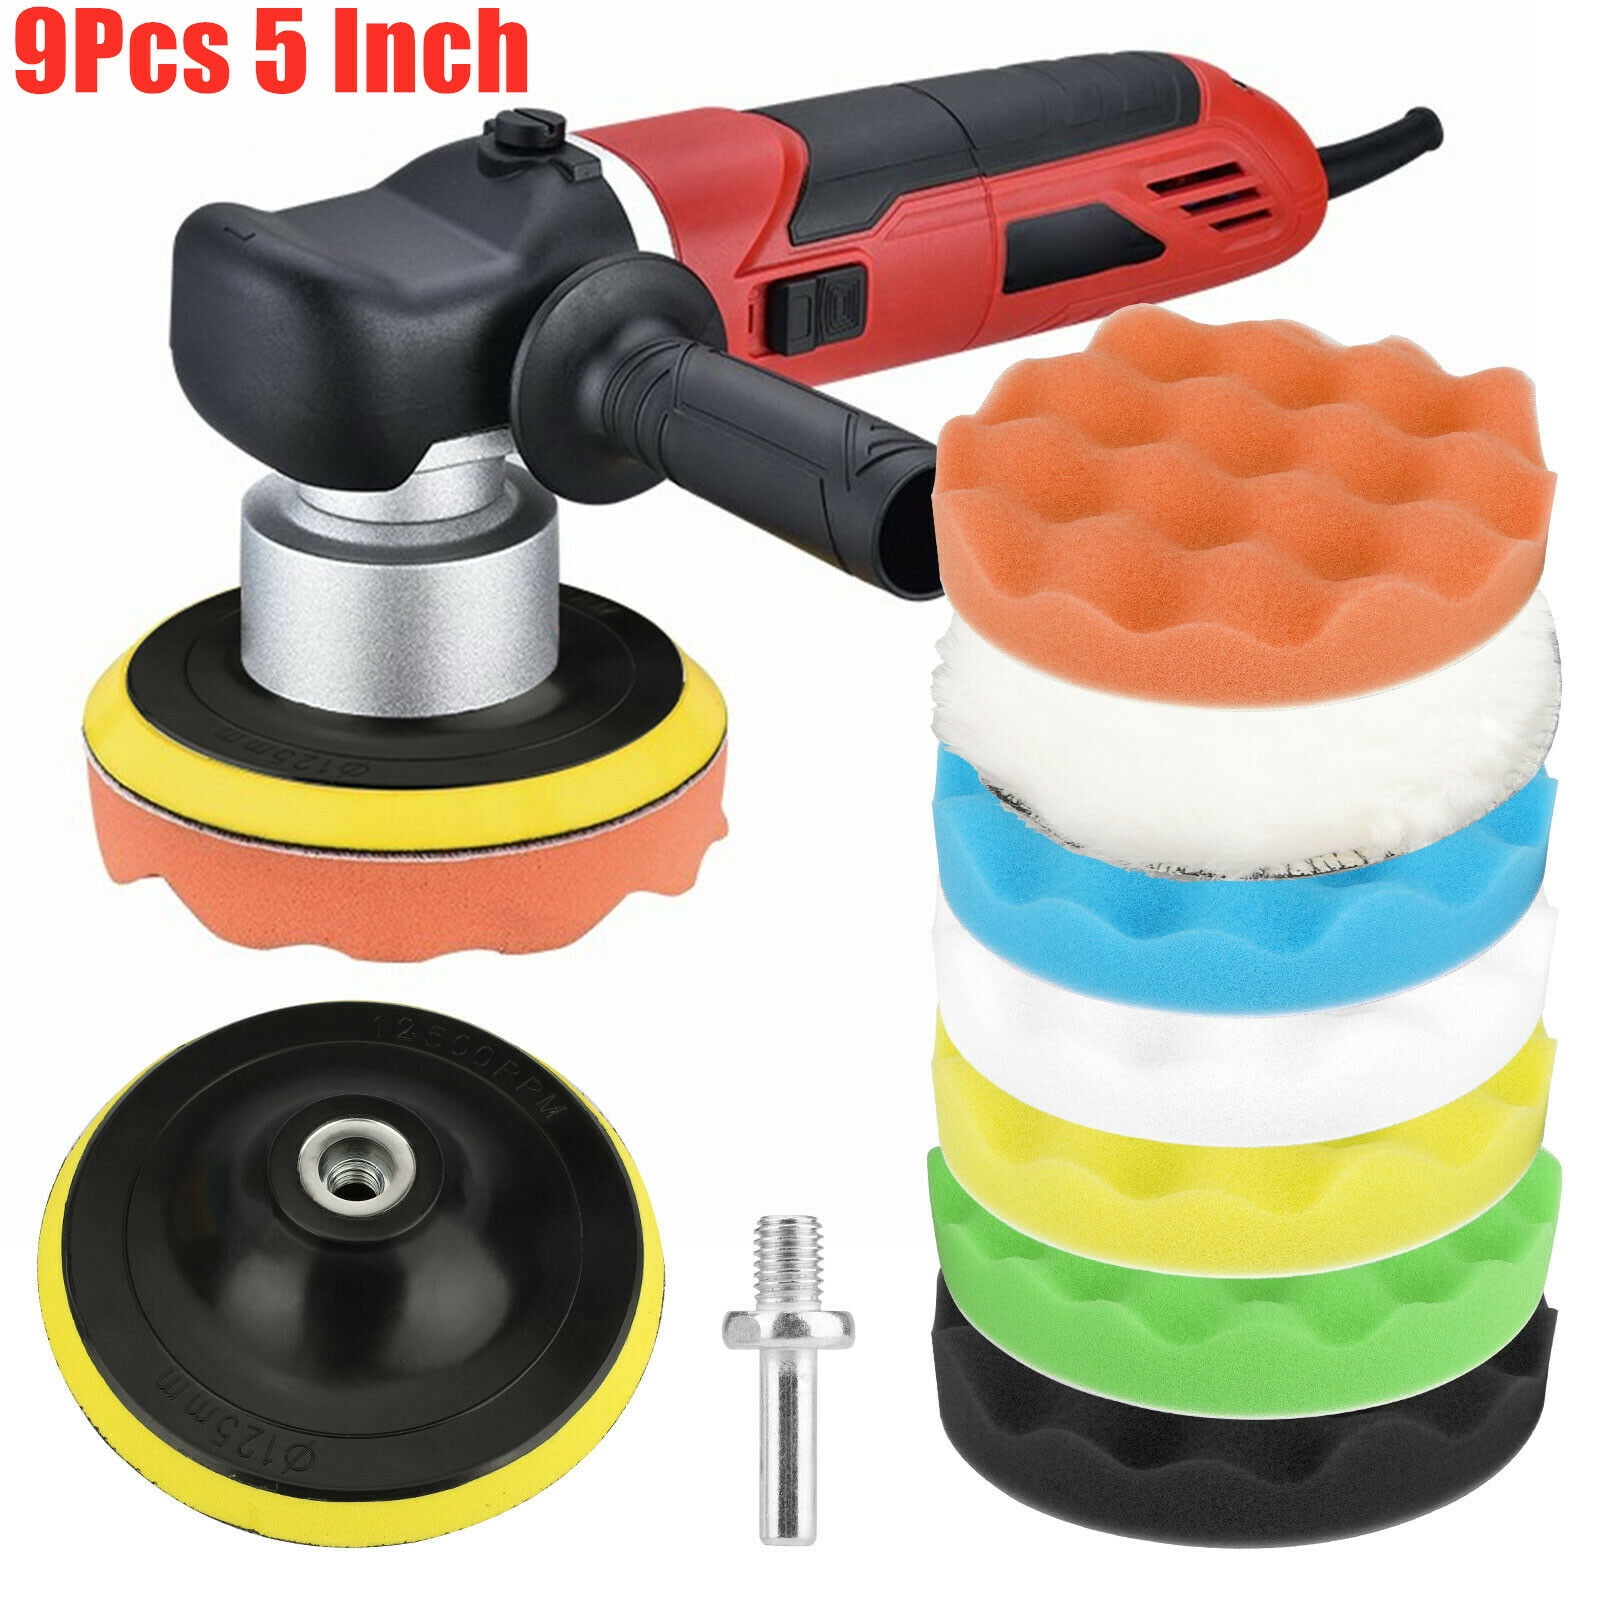 Compound Buffing Pads for Drill Polisher Attachment 125mm/5 inch Polishing Pads for Drill Sponge Waxing Buffing Pads Kit Polishing Pads for Car Polisher Auto Car Scratch Cleaning Accessories 5 PCS